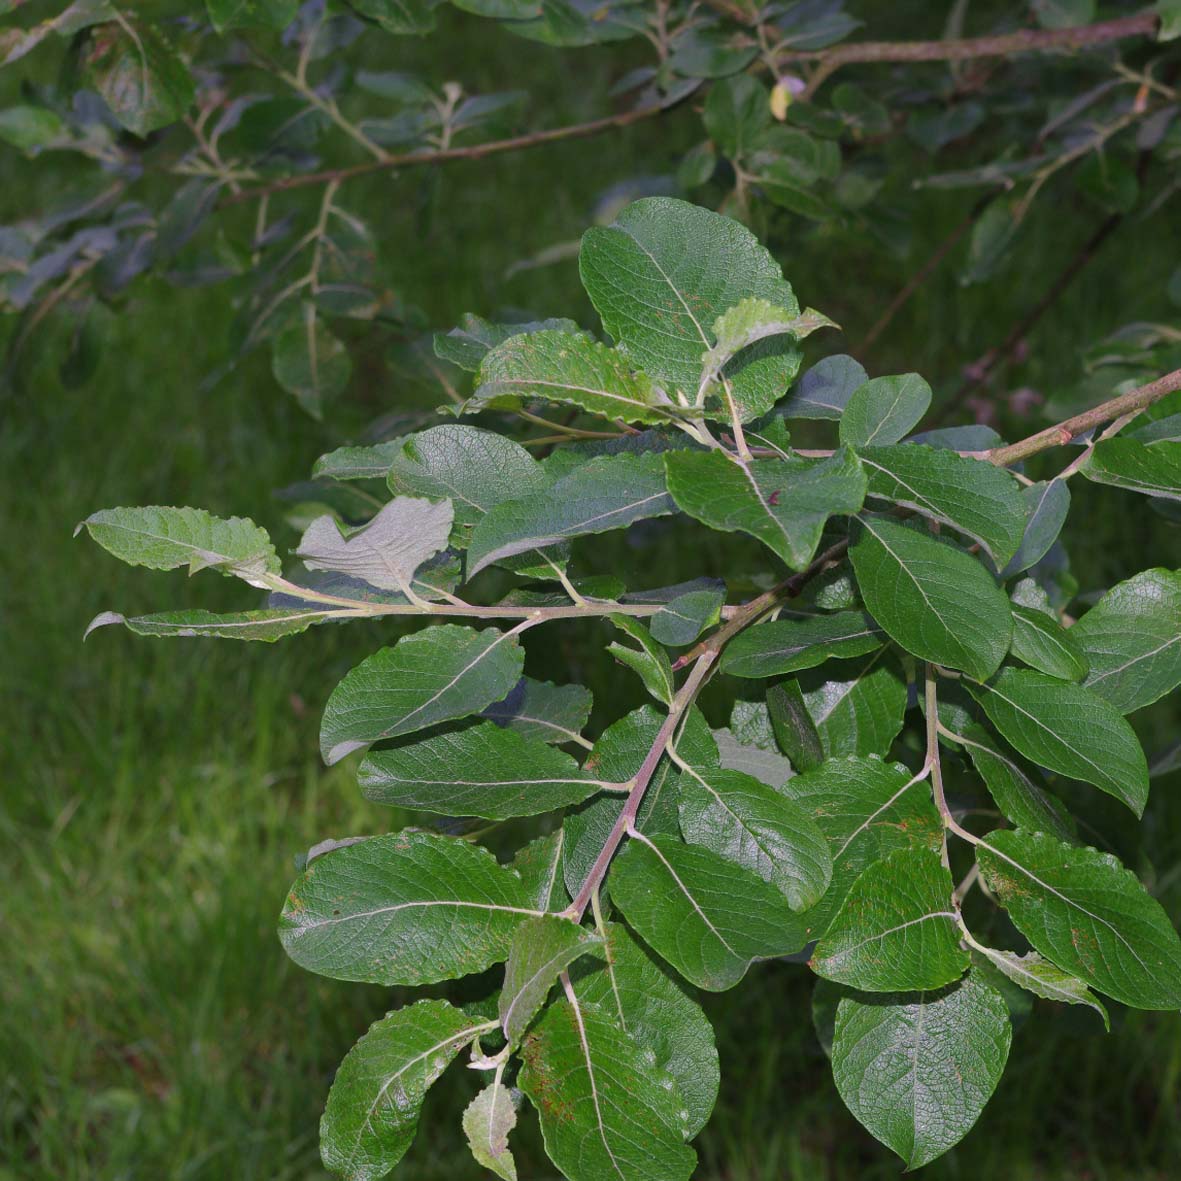 Willow (goat willow) leaves